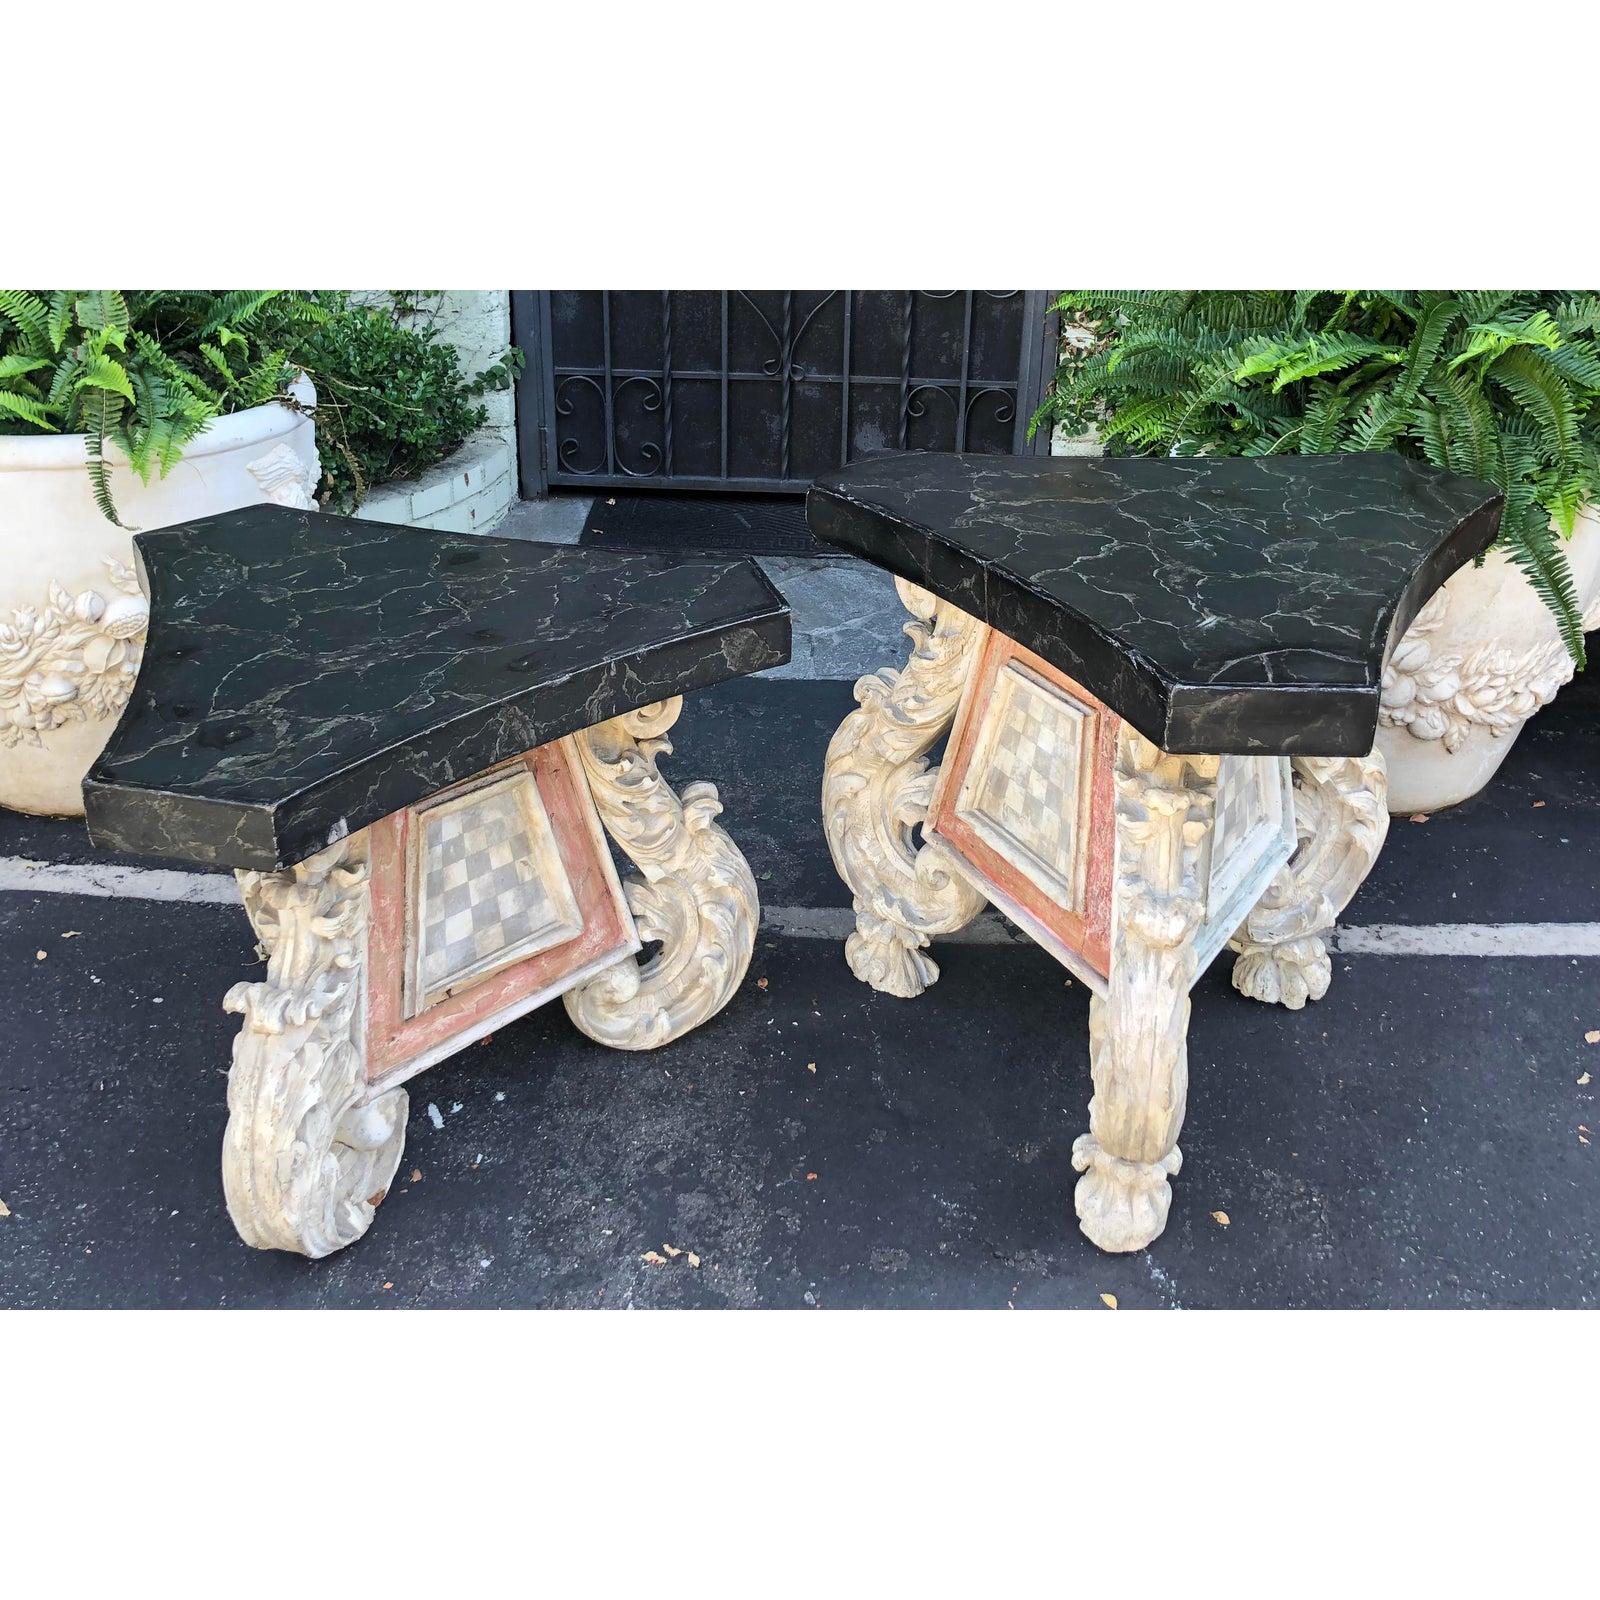 Very unusual associated pair of antique 18th century carved Venetian table. Similar but different:
The taller table is 26.5